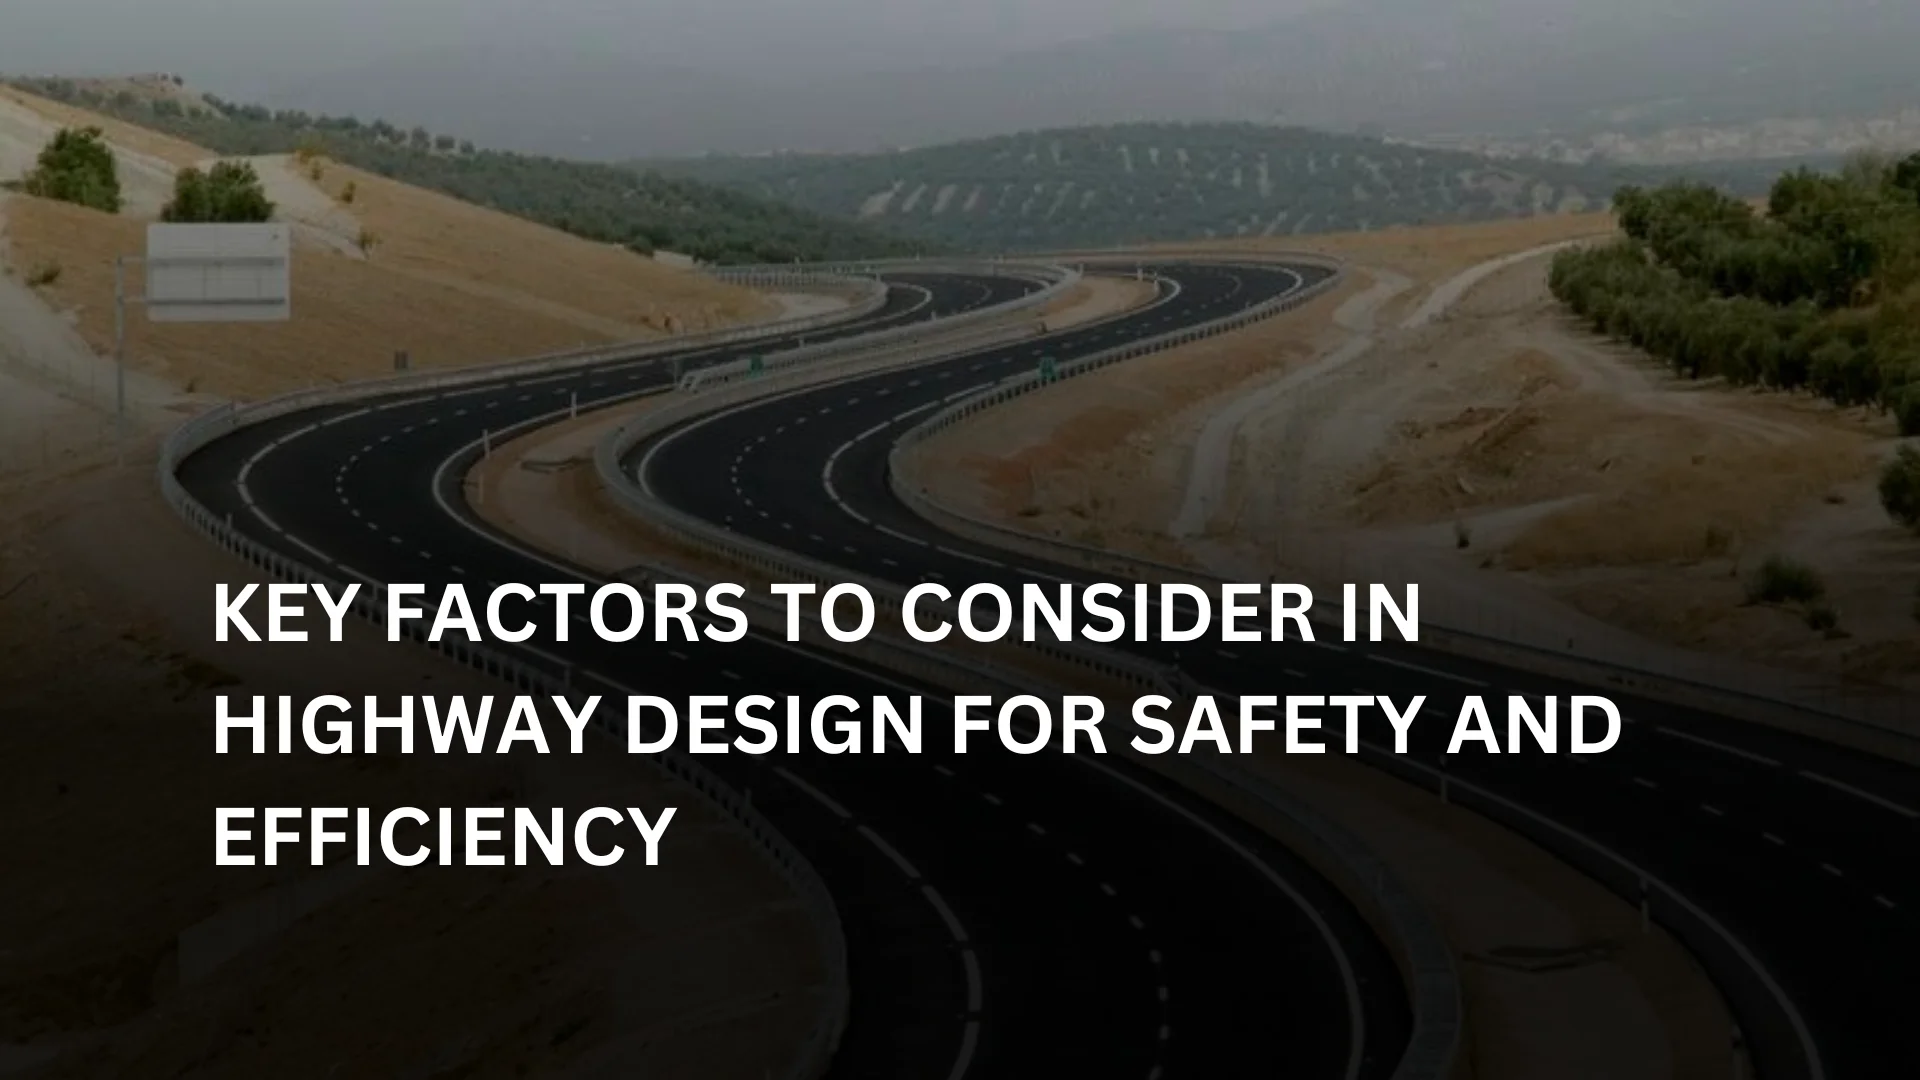 Key Factors to Consider in Highway Design for Safety and Efficiency